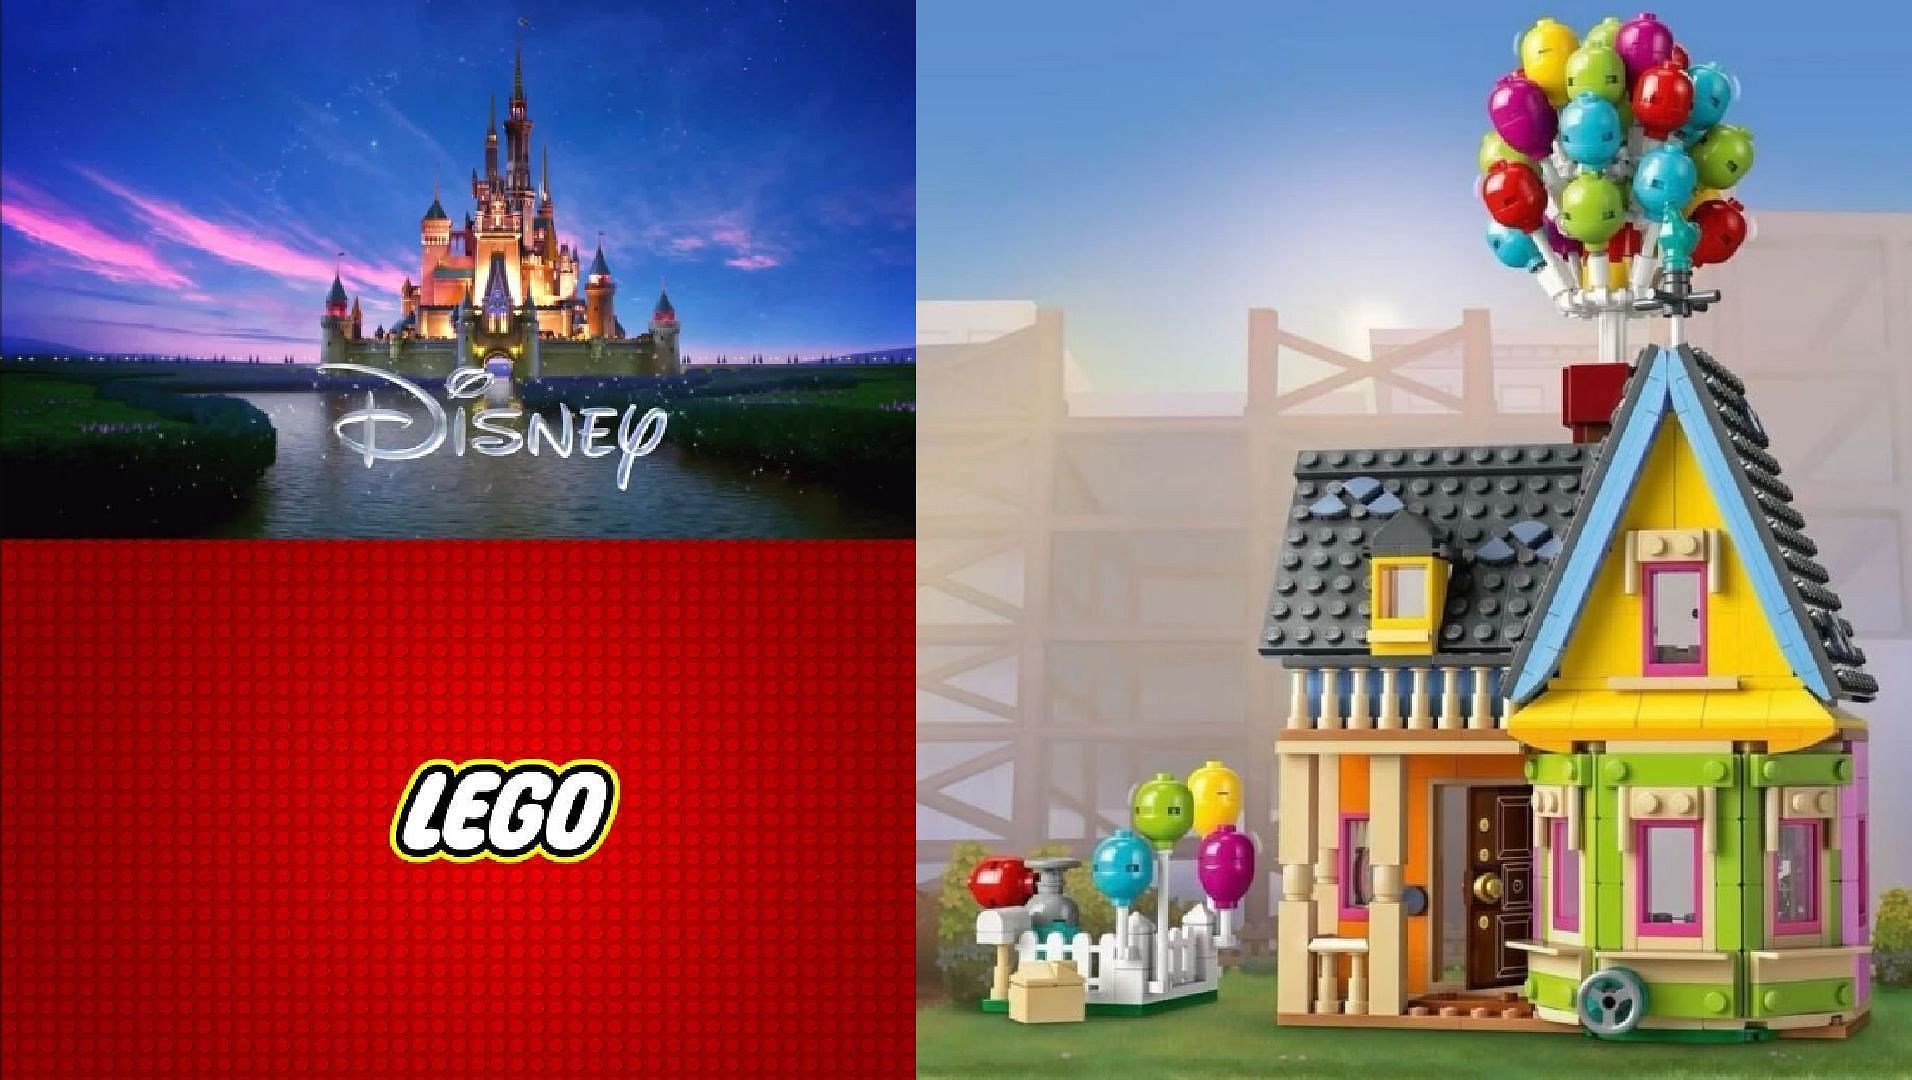 LEGO to launch two new Disney 100 Lego sets this April (Image via Lego/leaks)